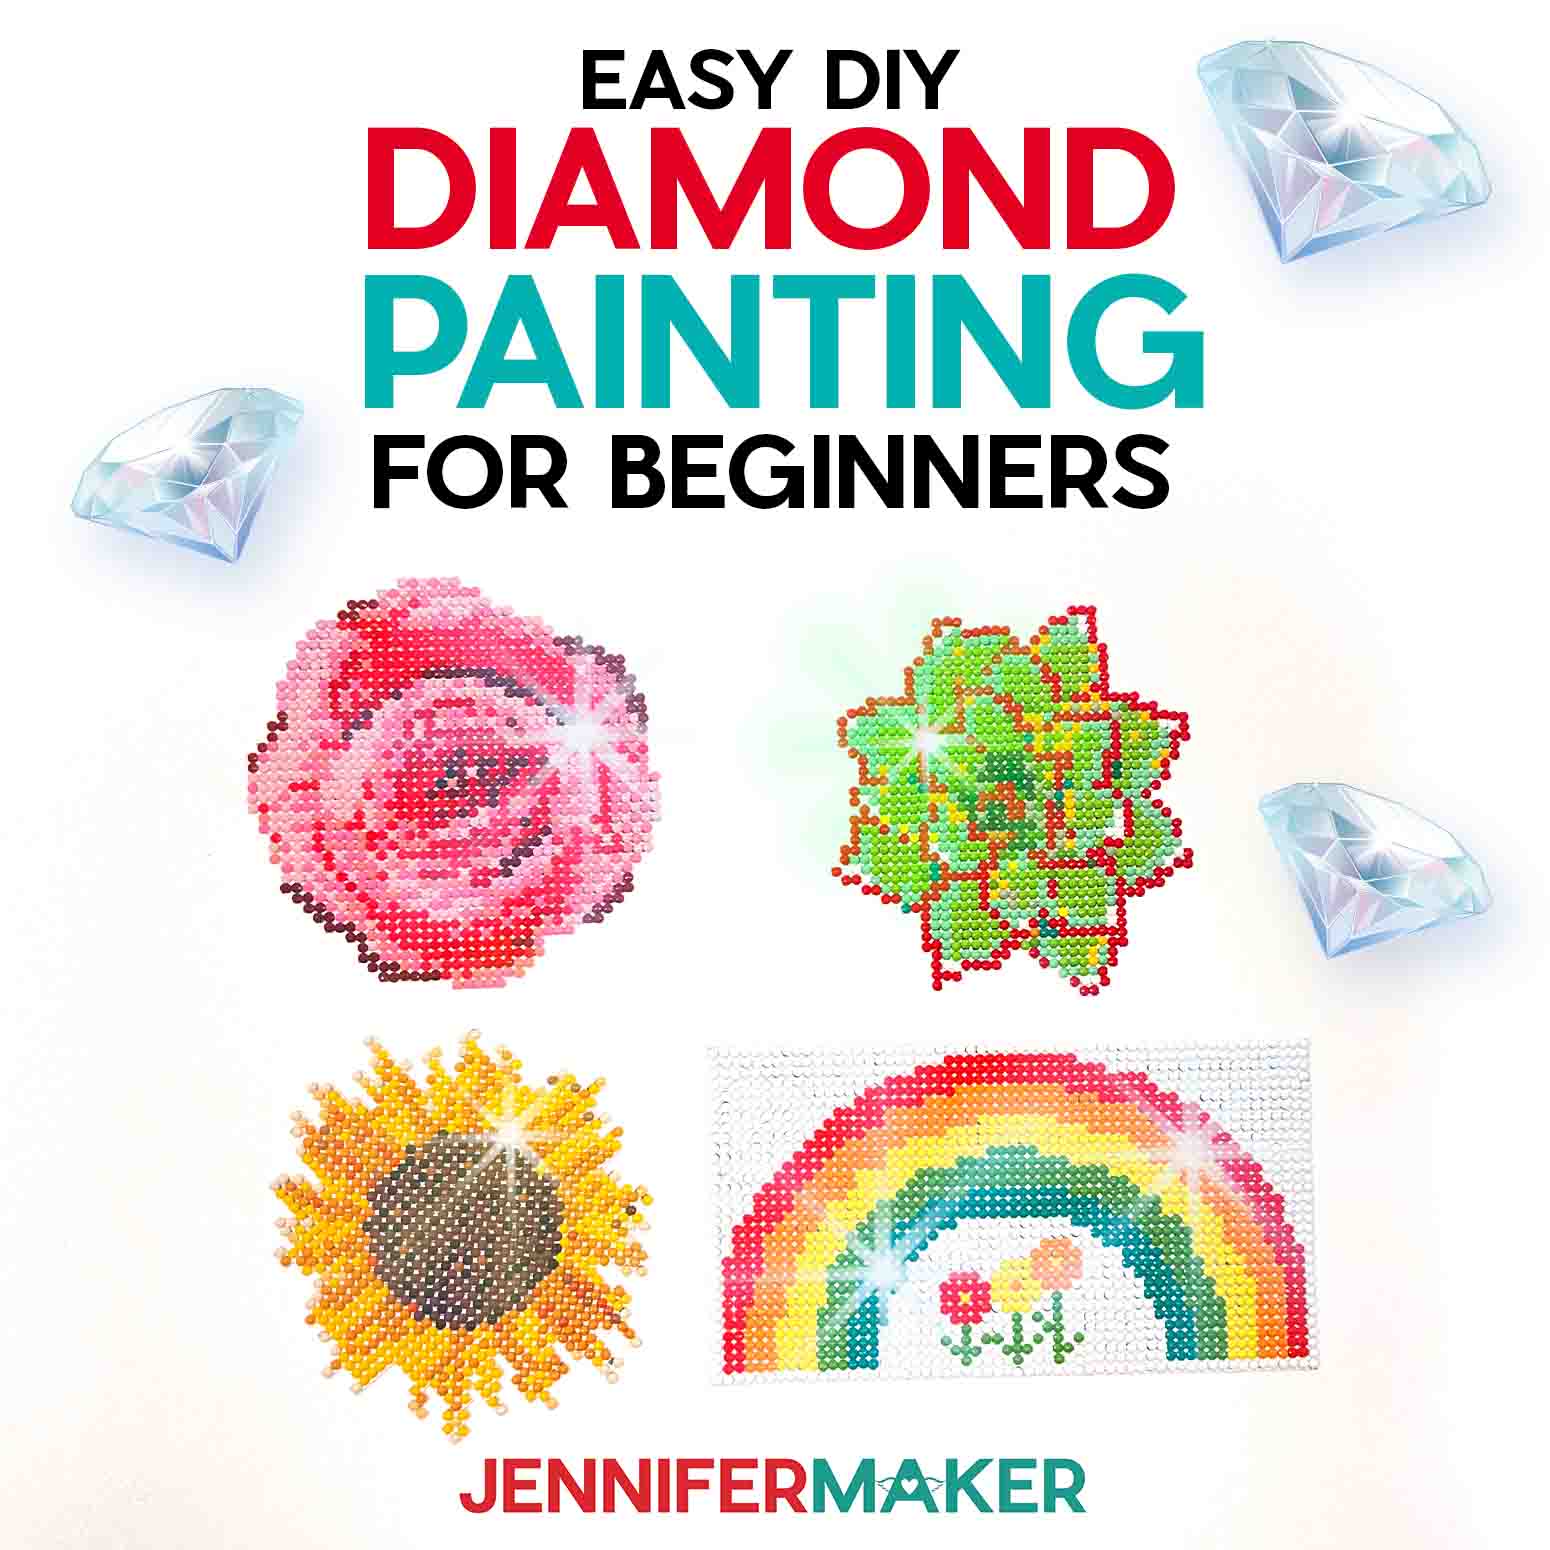 Diamond Painting for Beginners with Four Free & Easy Patterns!